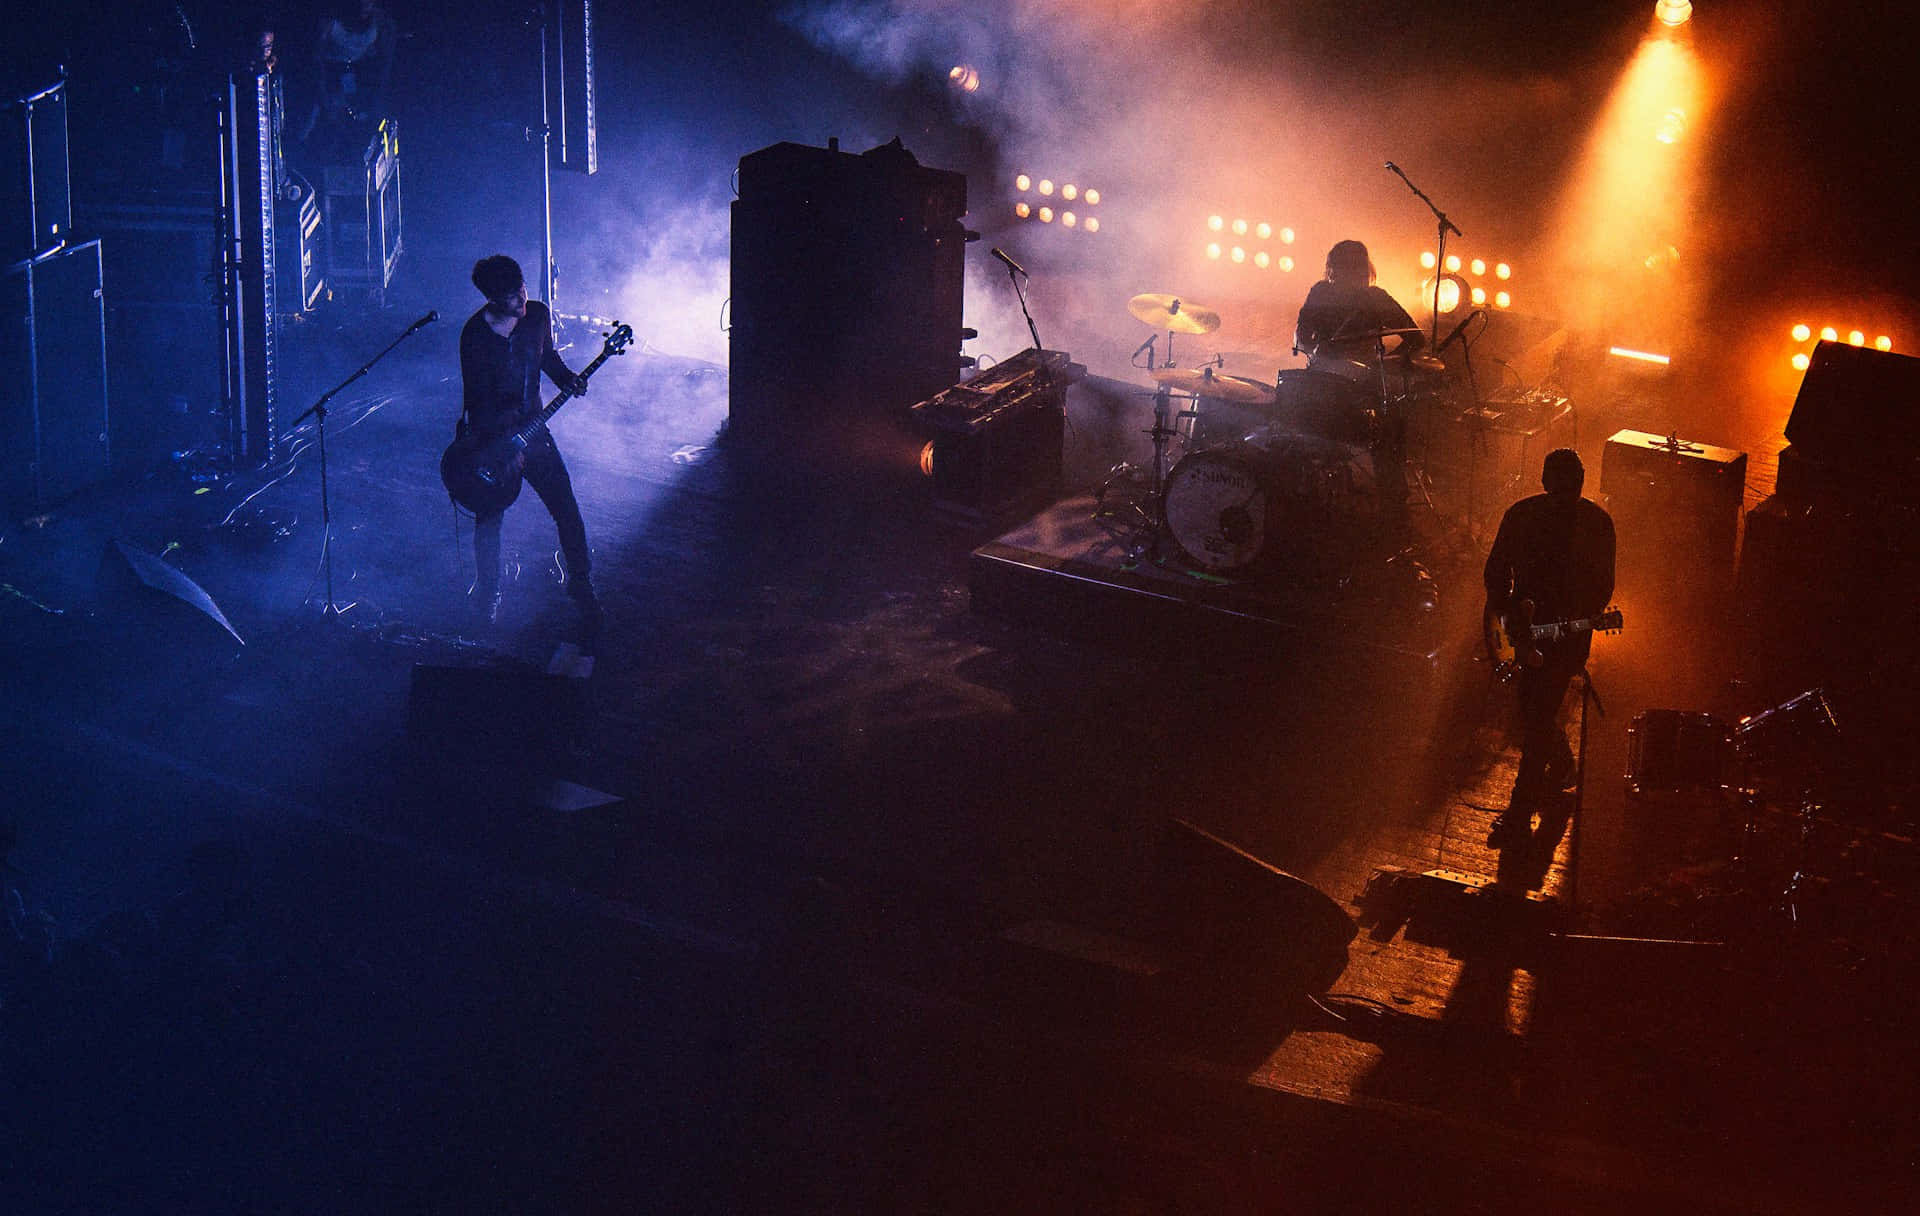 Rock Band Performingon Stagein Smoky Atmosphere Wallpaper